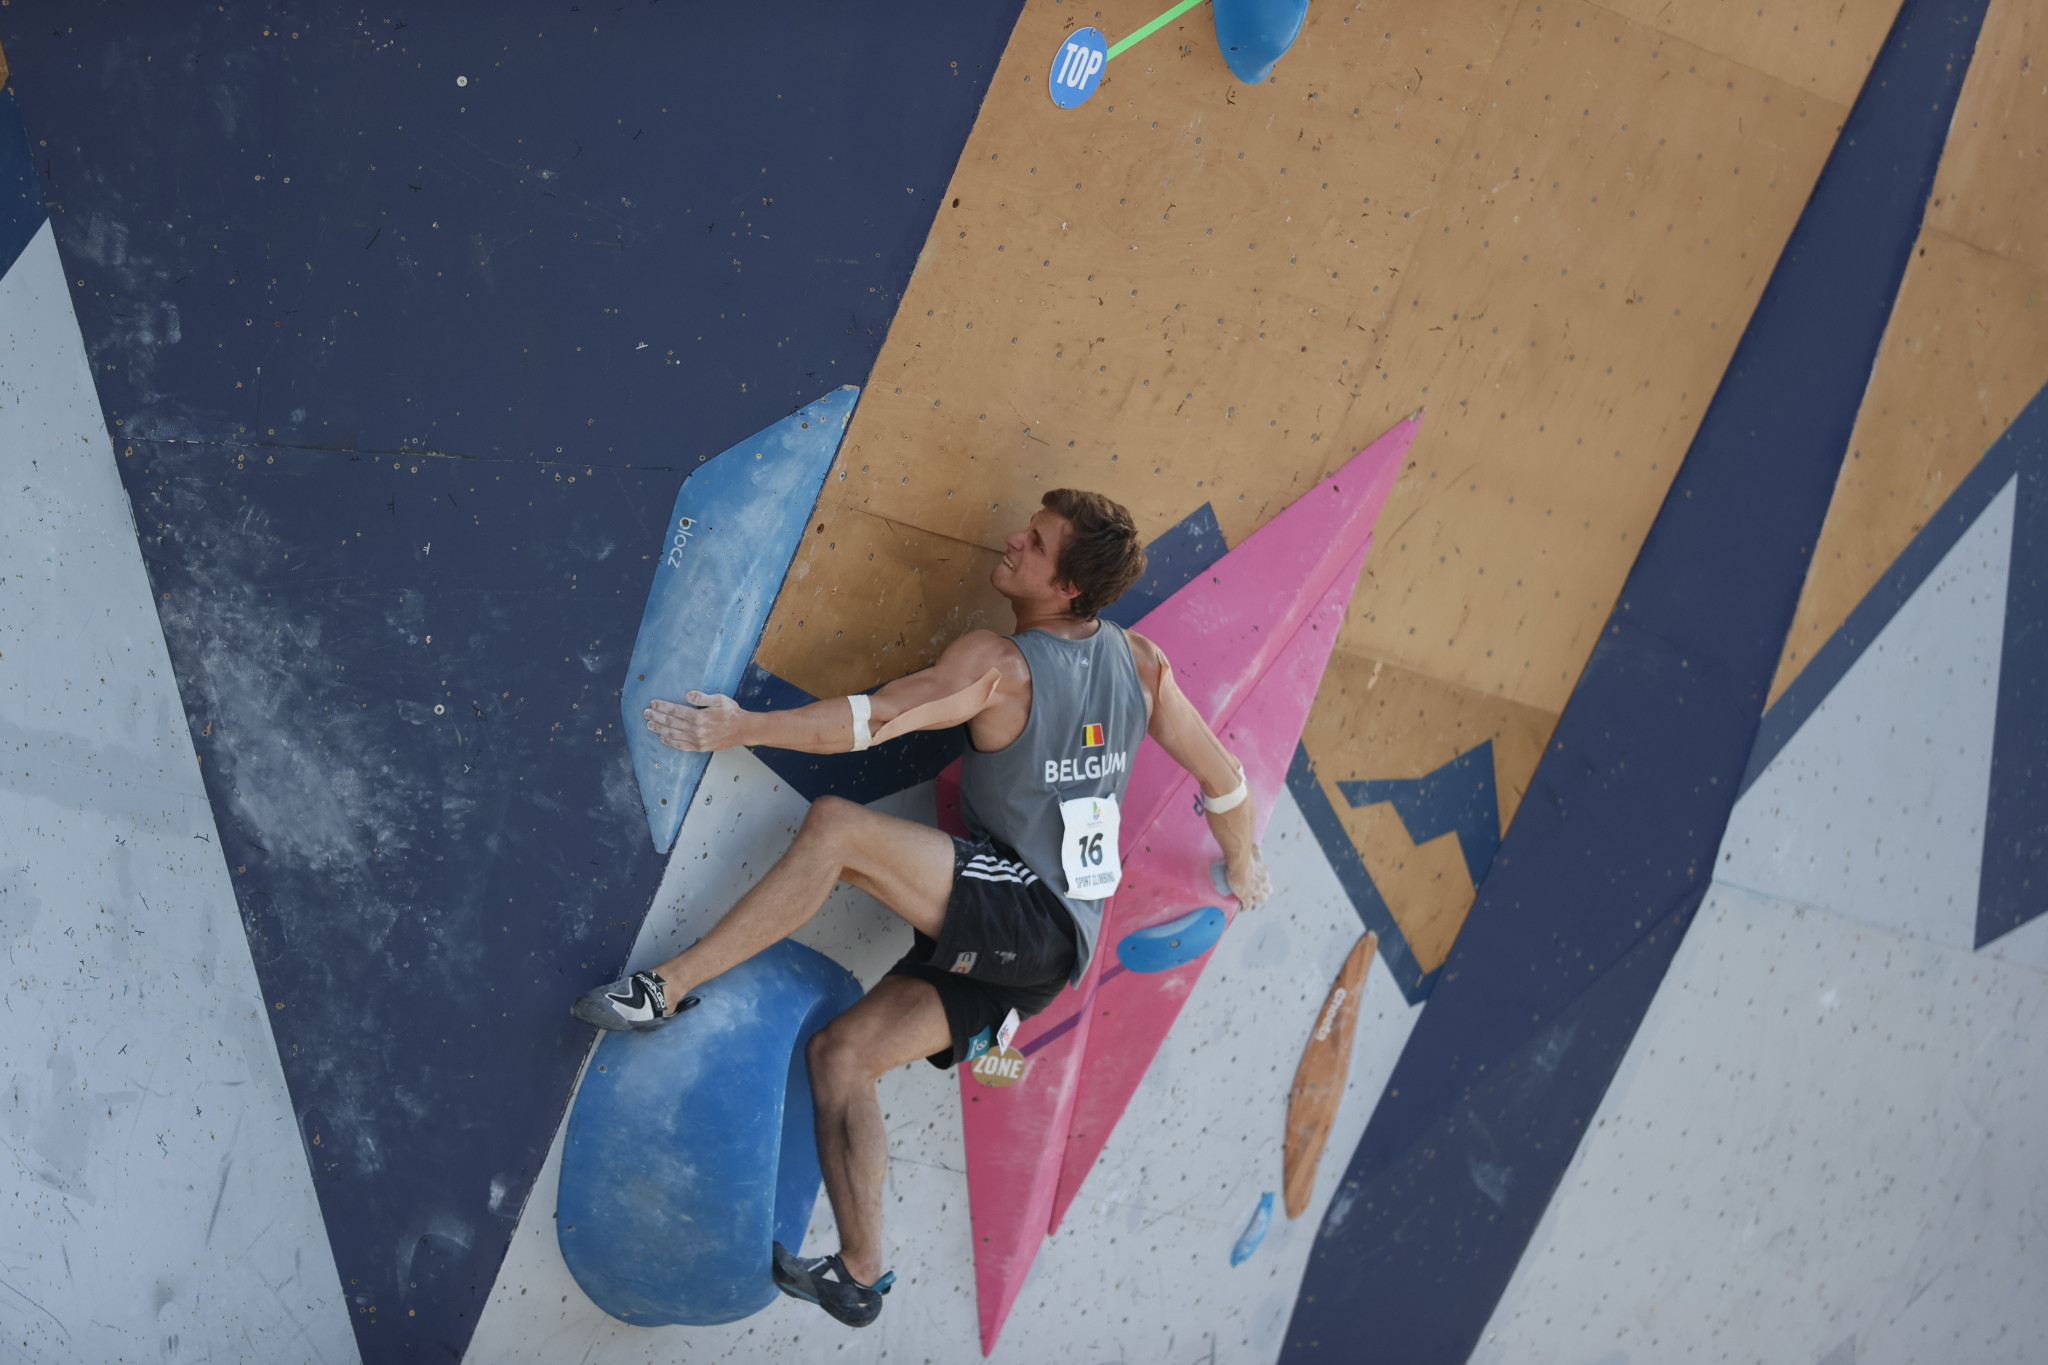 Belgium’s Nicolas Collin emerged victiours from the men's boulder final ©The World Games 2022